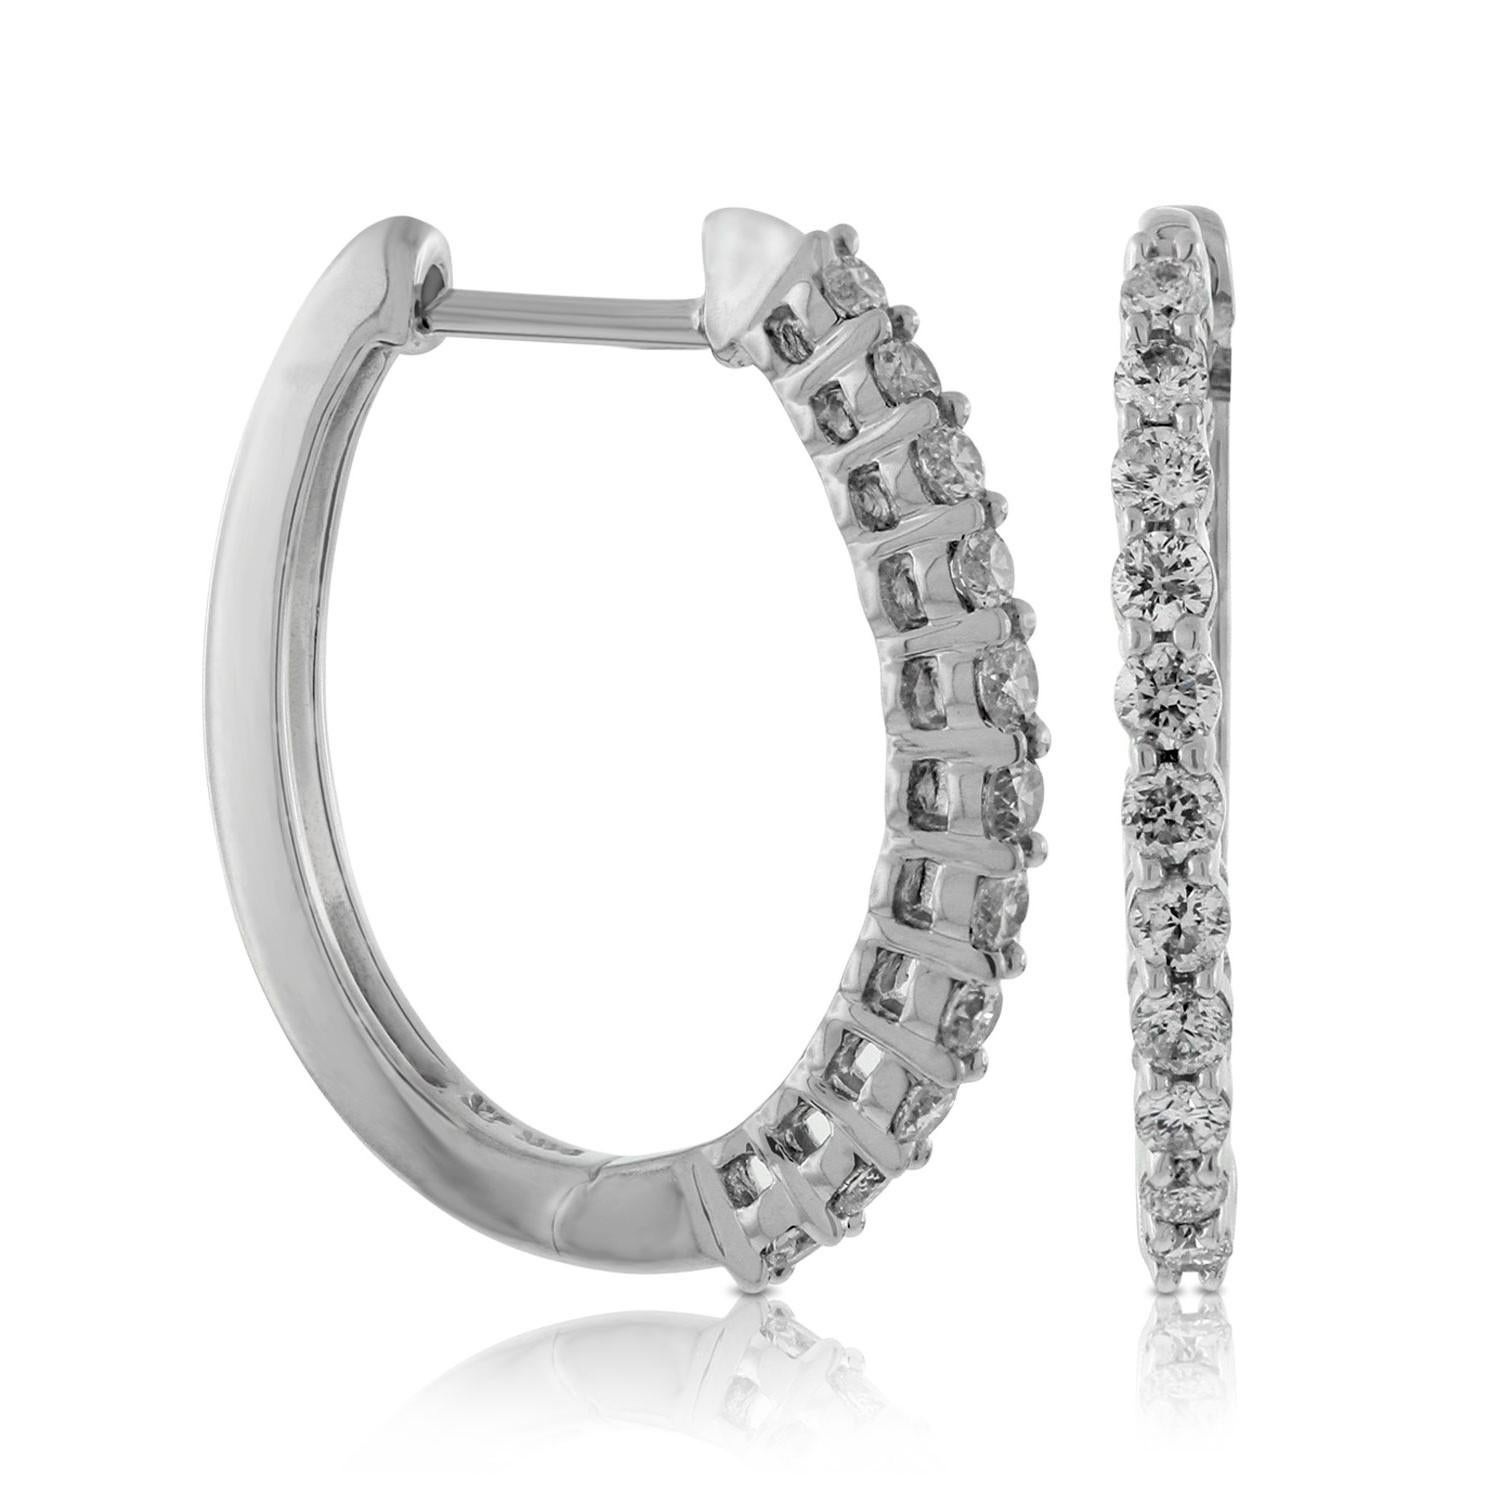 Nothing says luxury like an incredible pair of diamond oval hoop earrings. These stunning brightly polished 14 karat white gold outside oval-shaped hoop earrings feature a total of 24 round brilliant cut diamonds totaling 1.00 carats are prong set